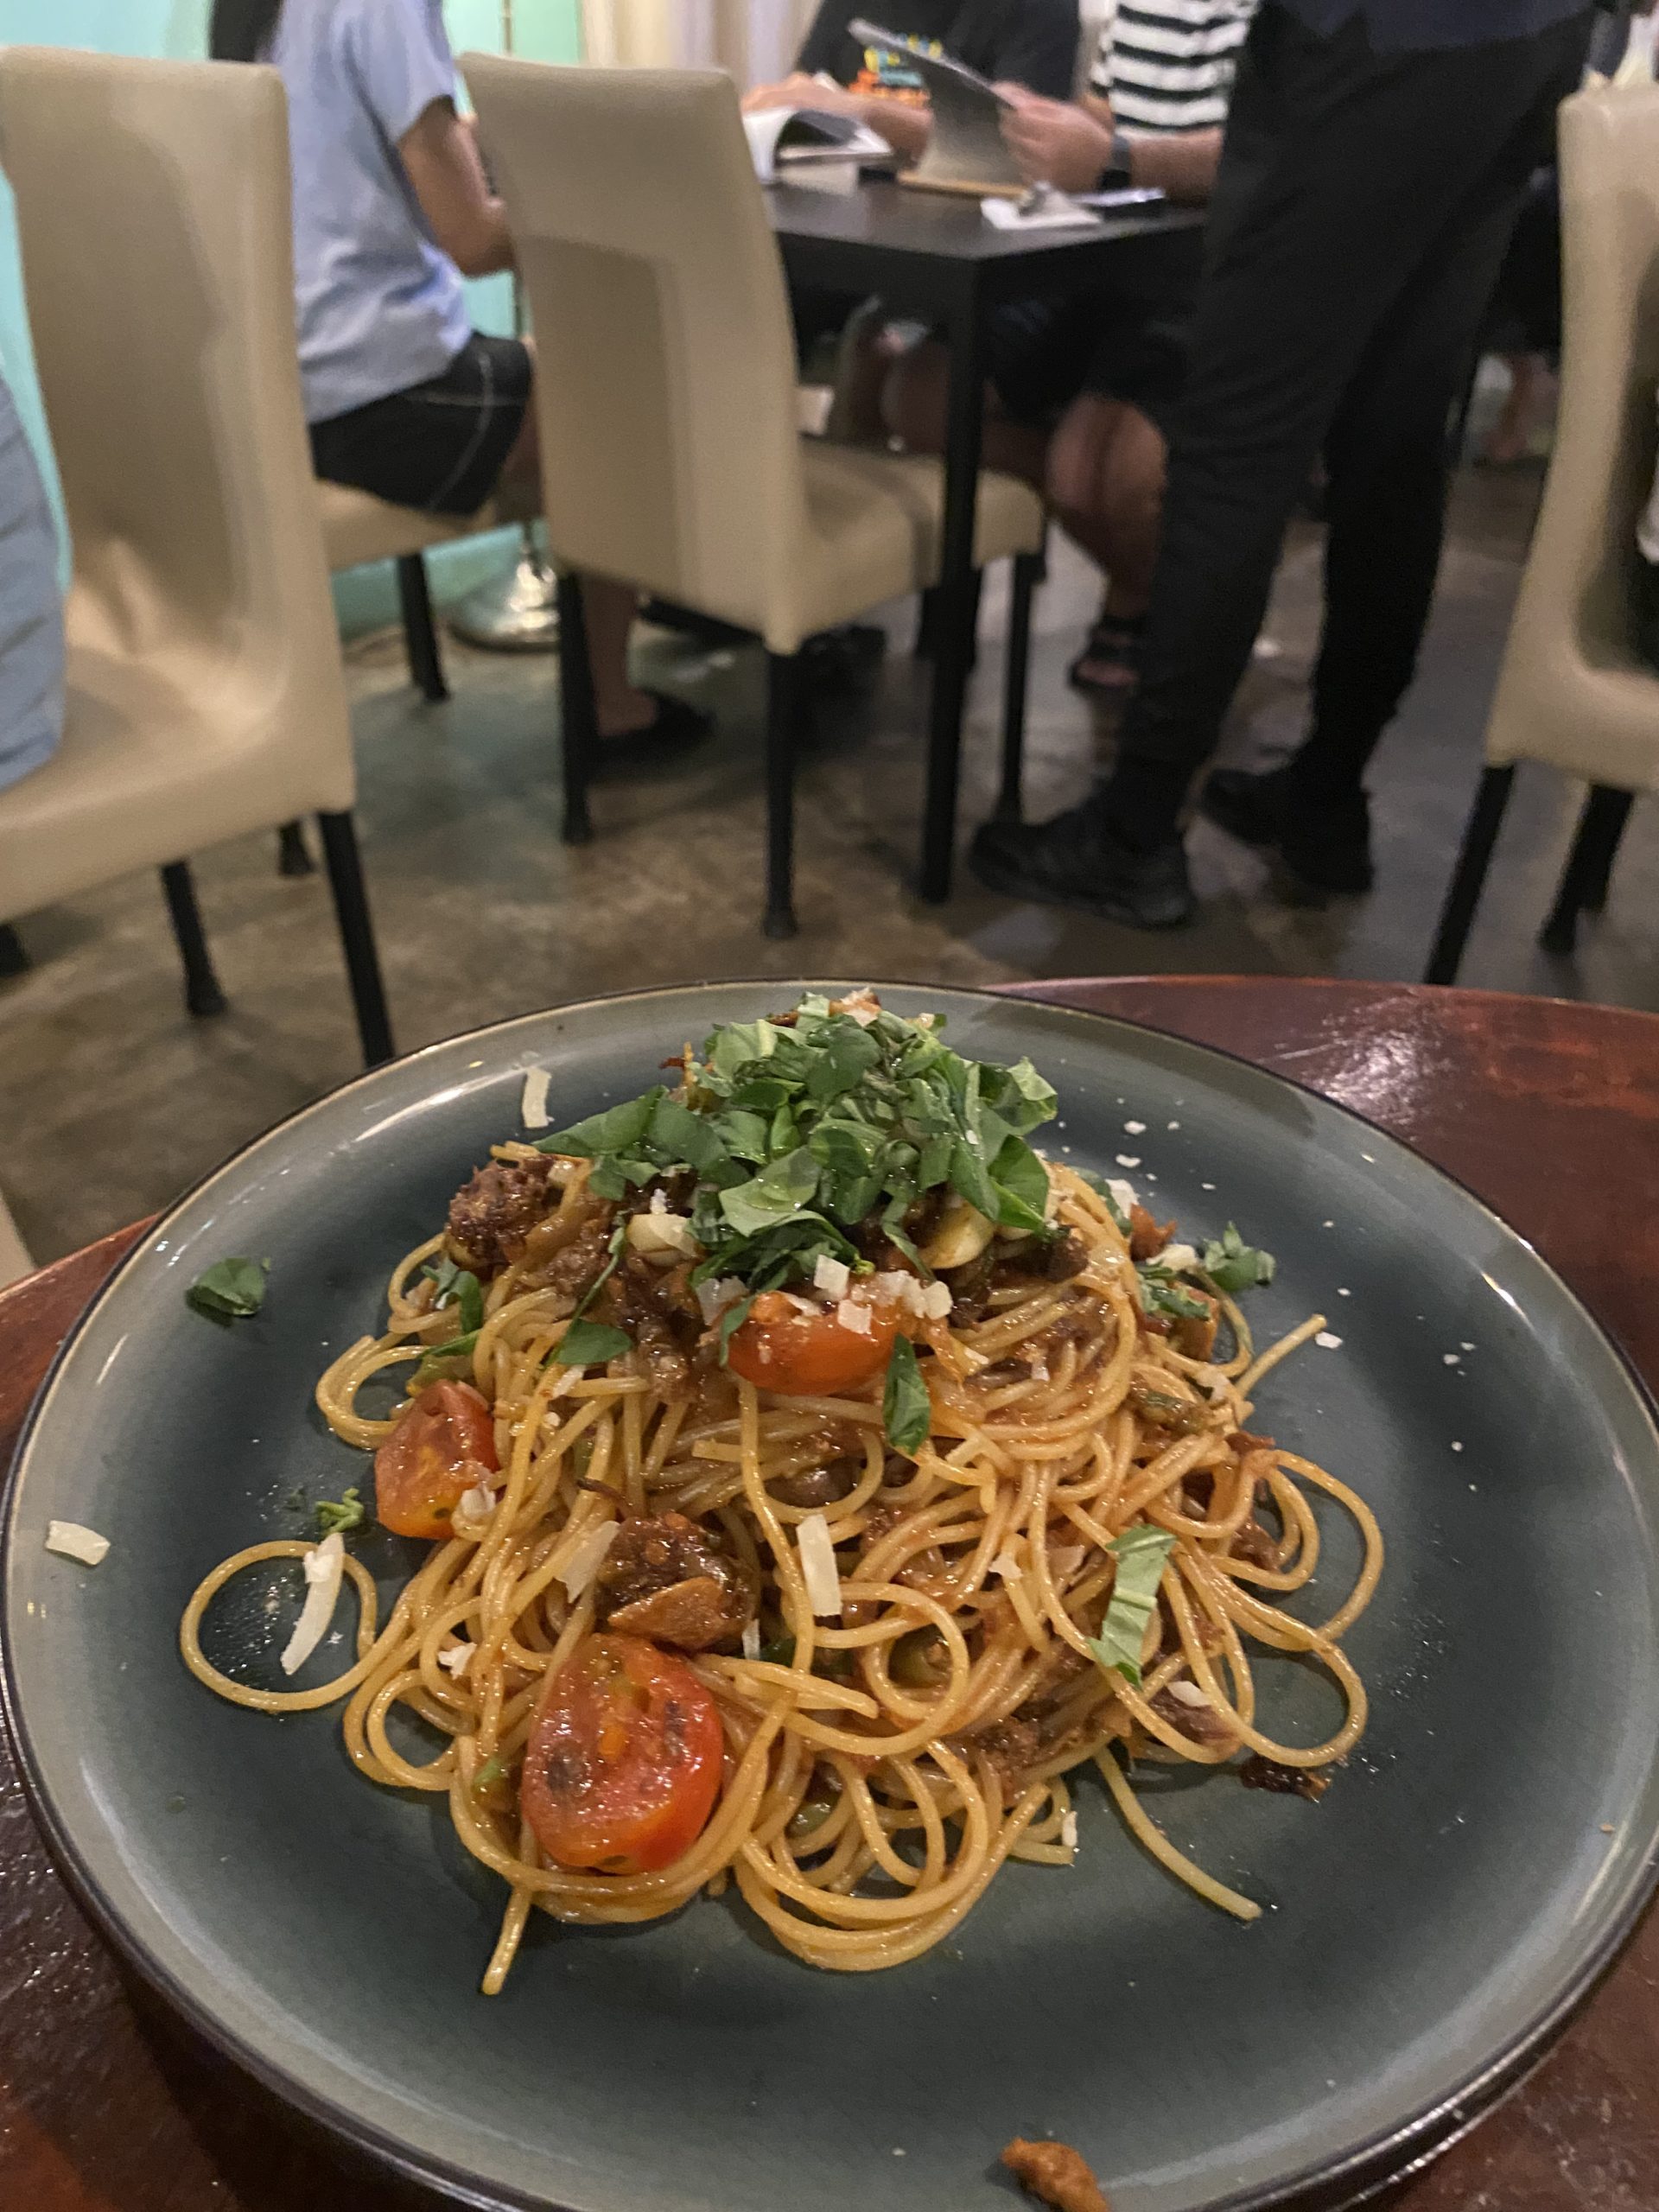 Basil pasta house: pastably the best in kuchai lama? This noodle-crazy editor definitely thinks so